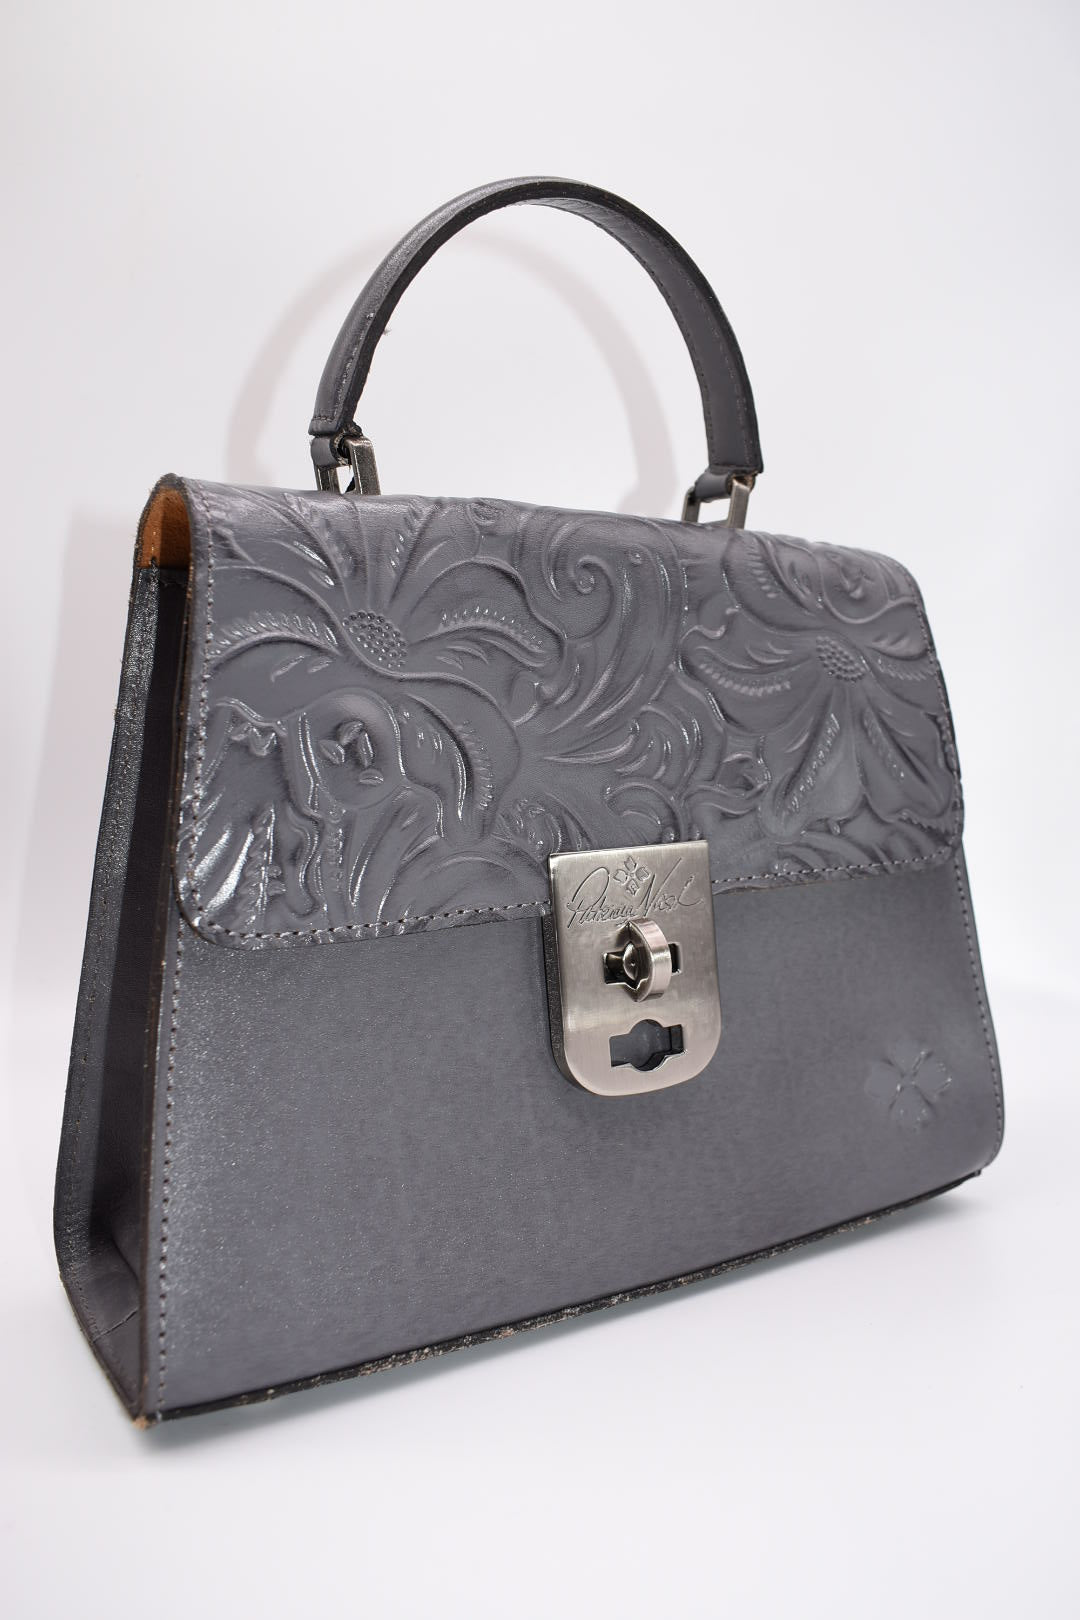 Patricia Nash Chauny Satchel Bag in Smoke Tooled Leather